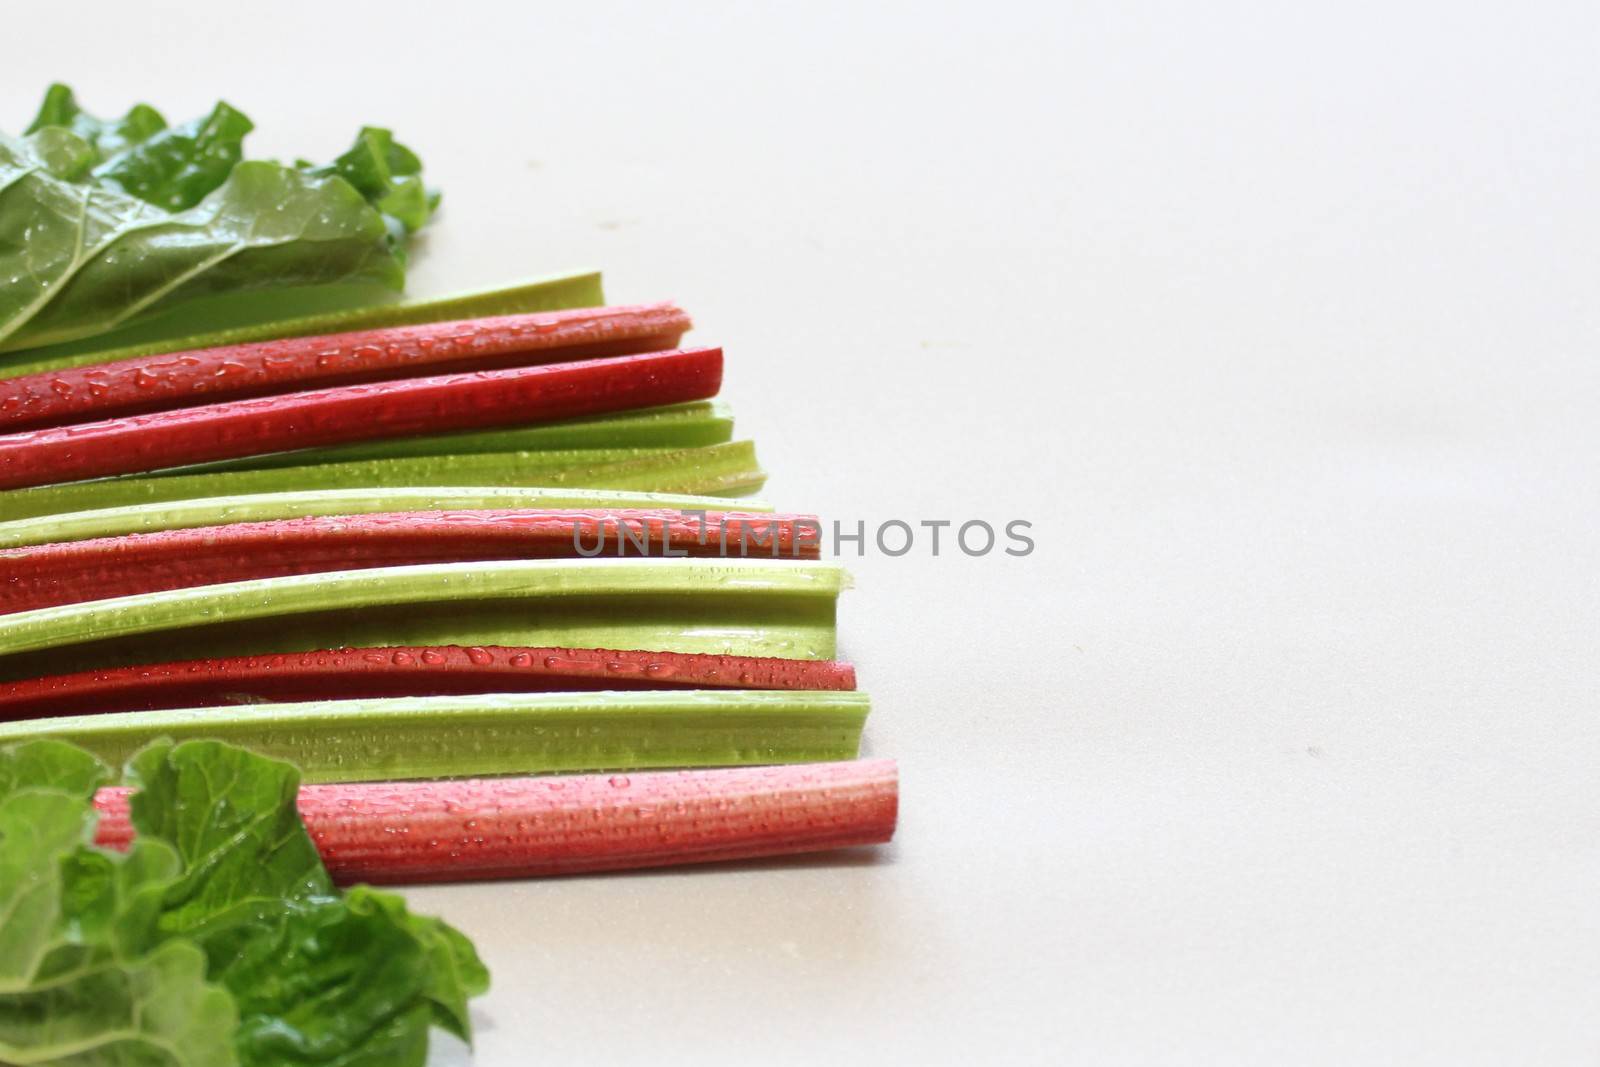 The picture shows colorful delicious rhubarb with leaves.